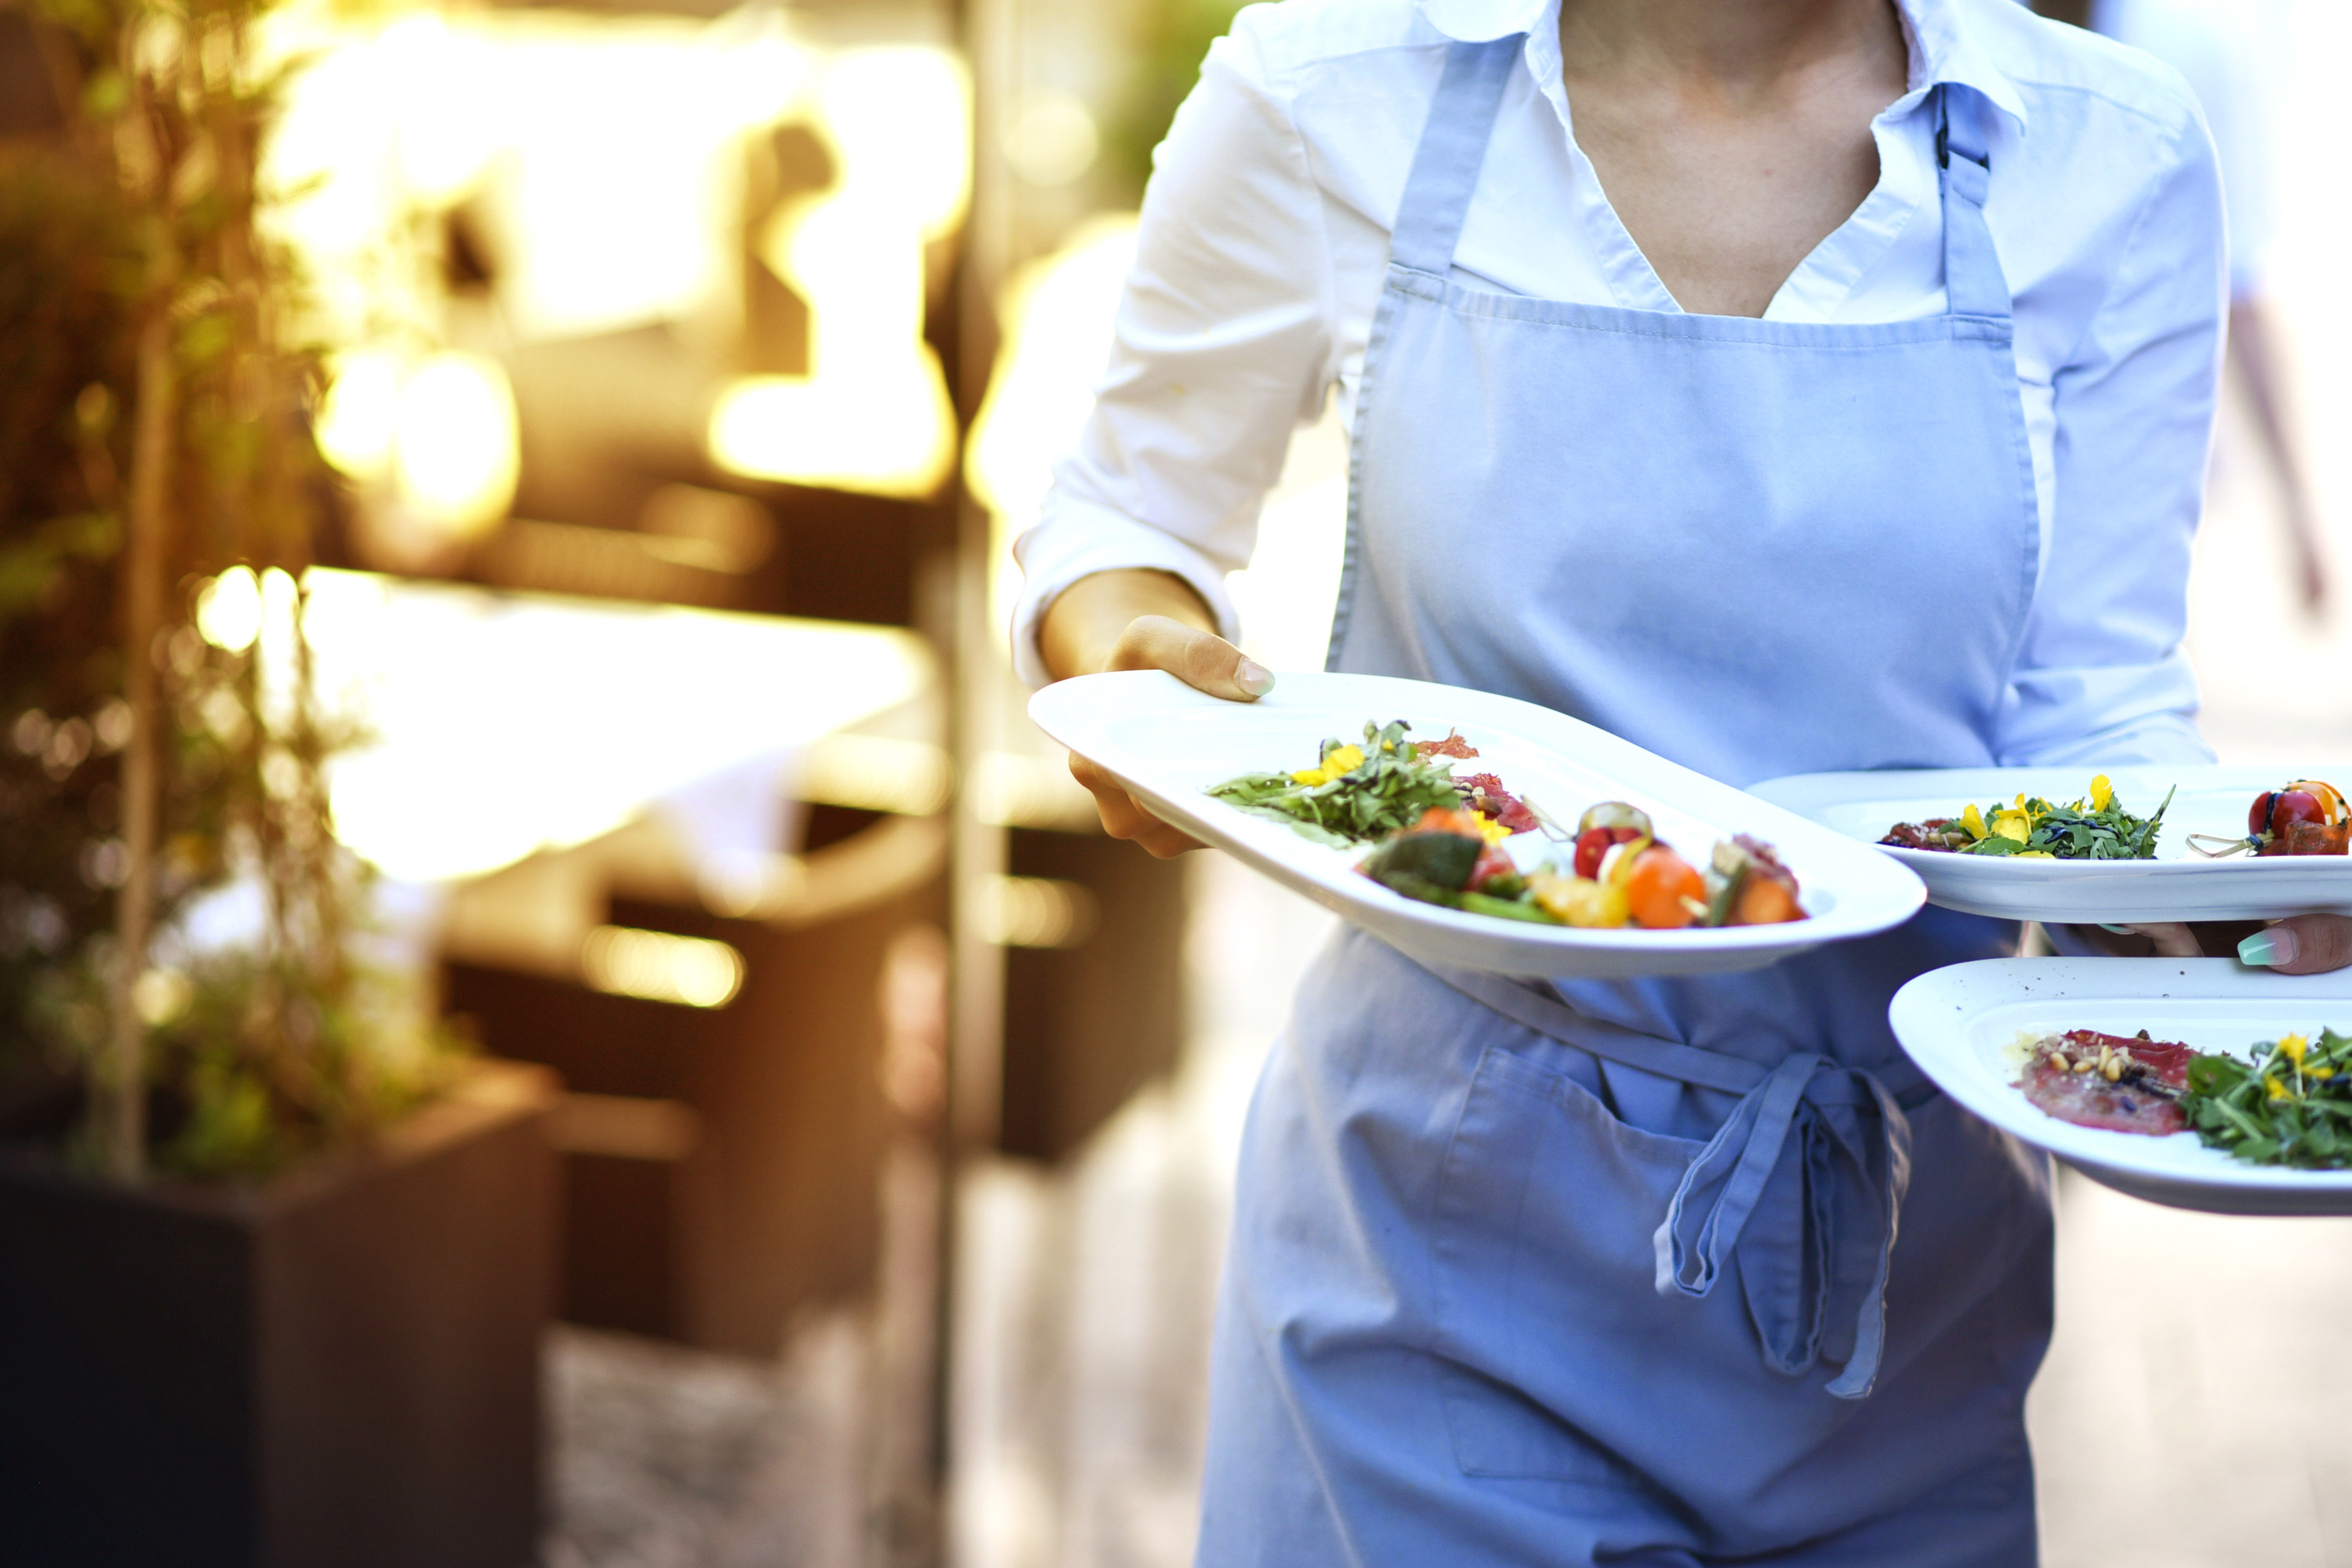 Restaurant server carrying three plates out of the kitchen